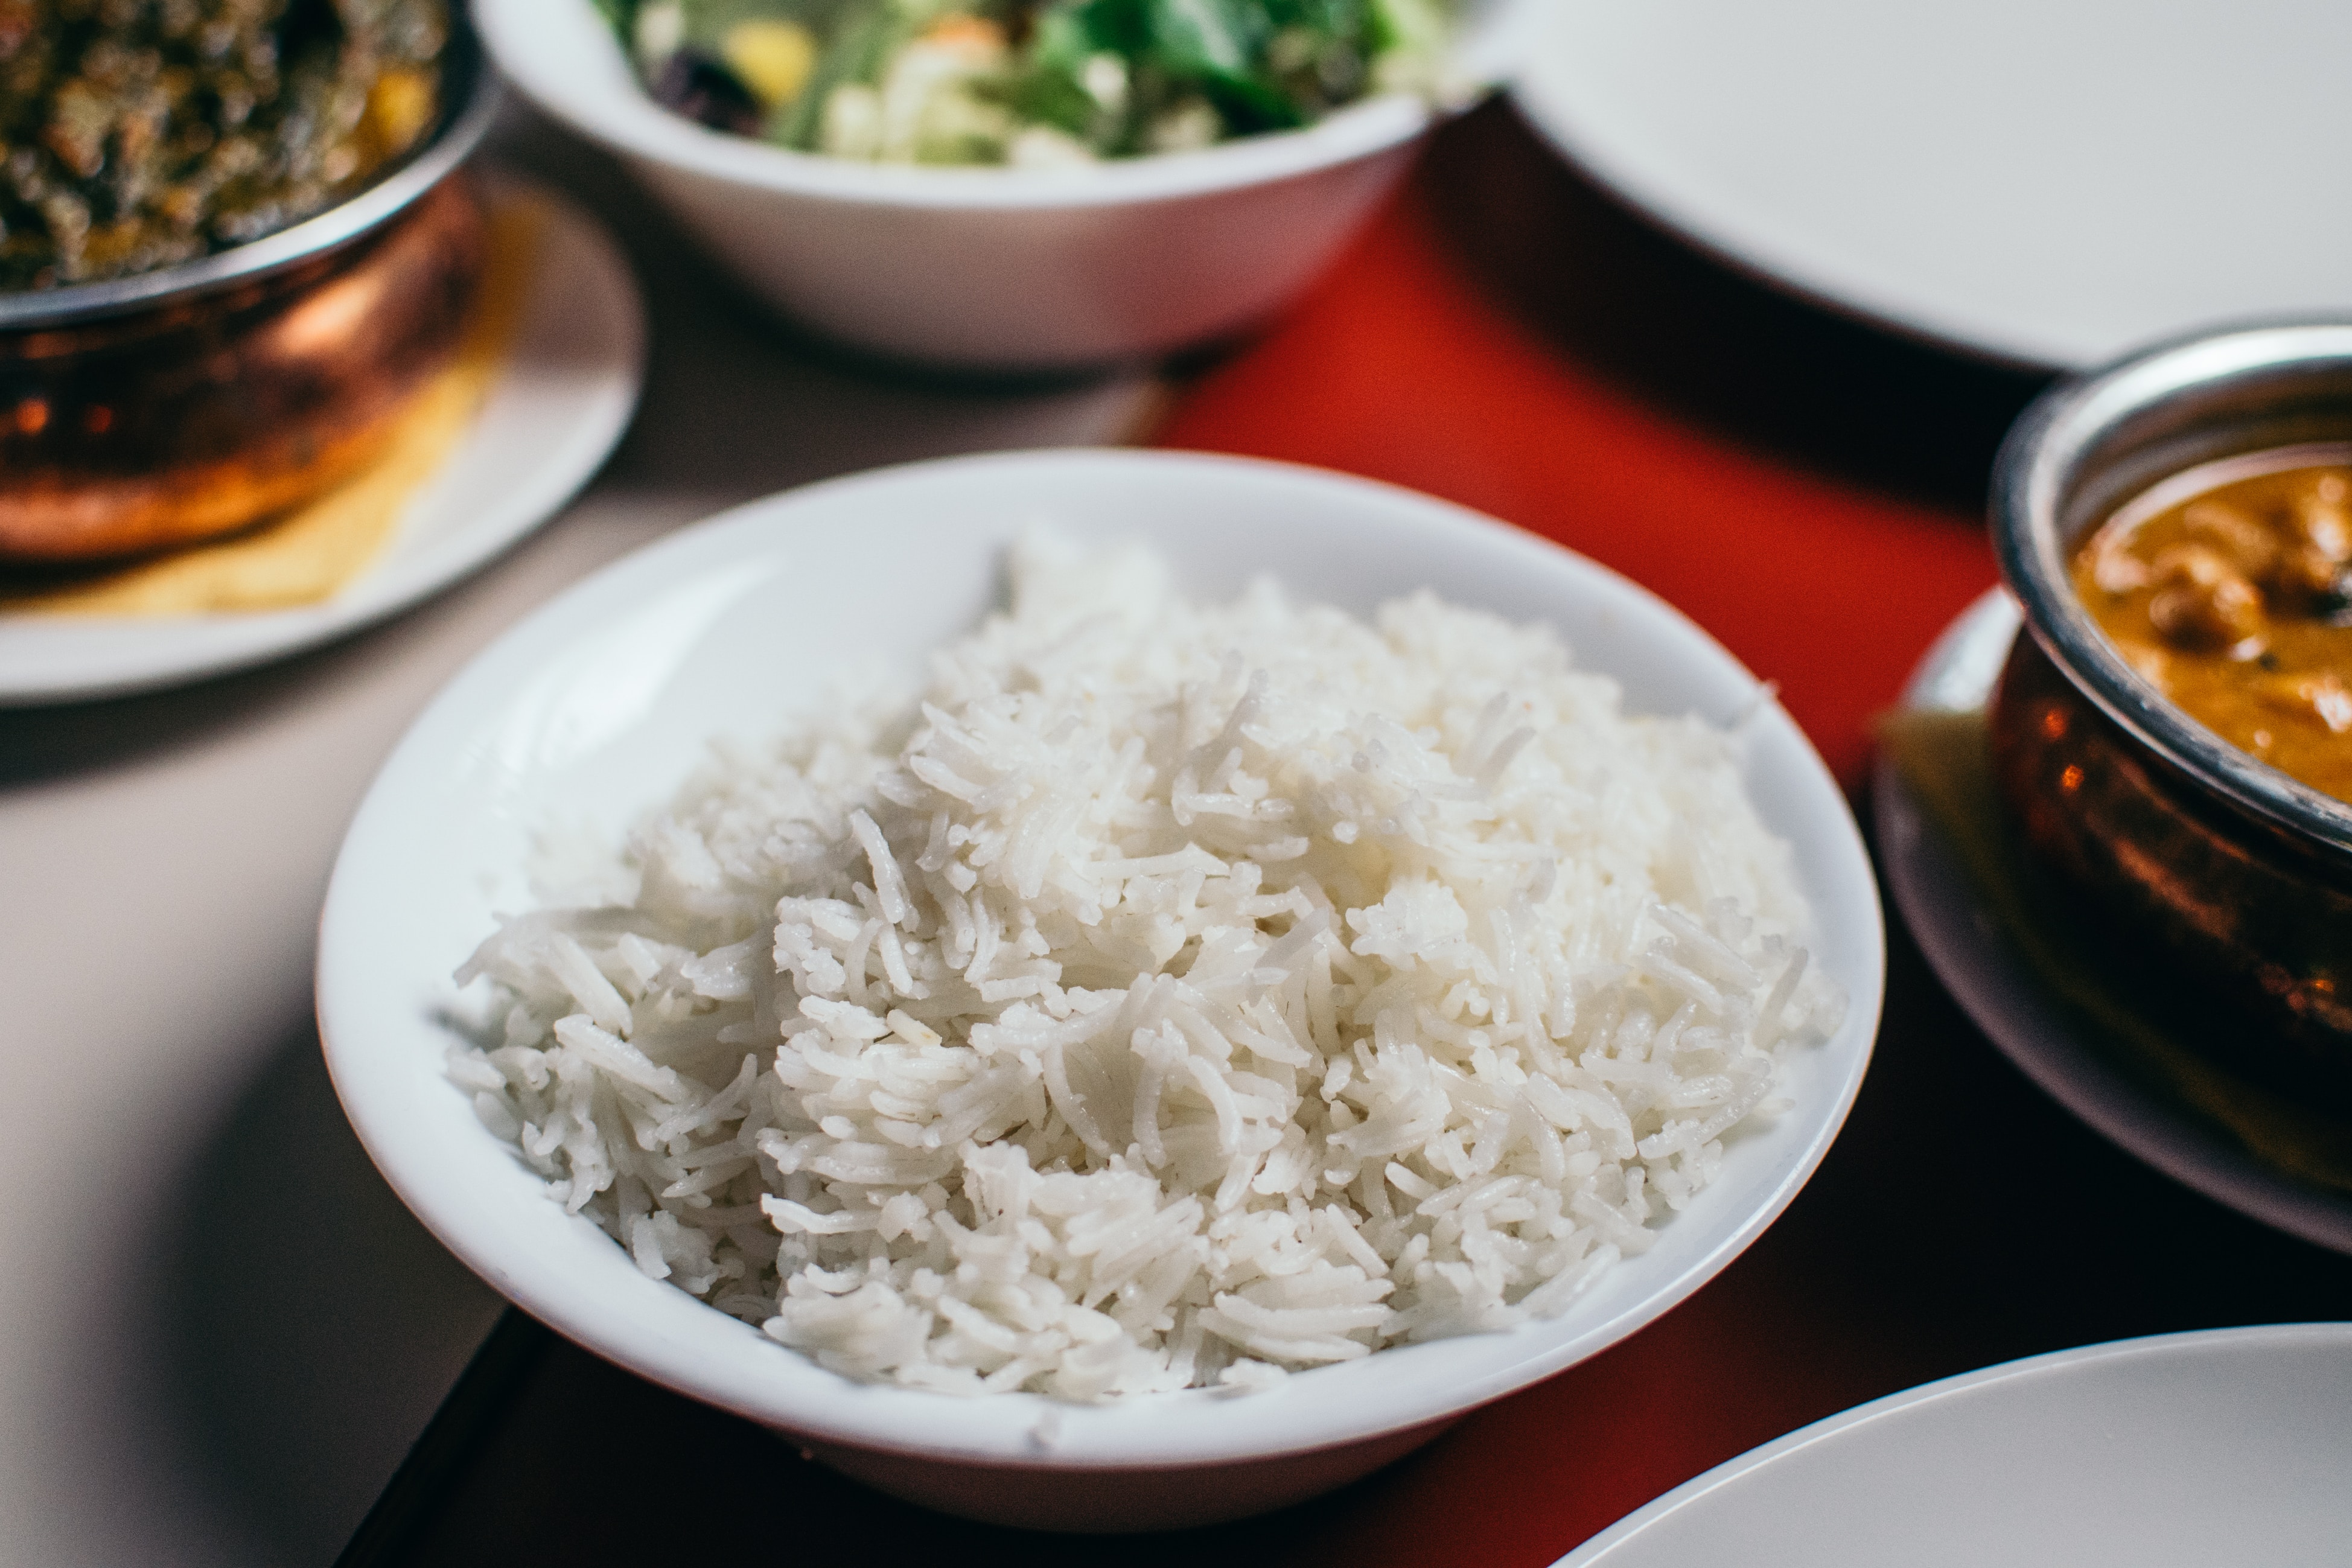 A bowl of rice surrounded by dishes